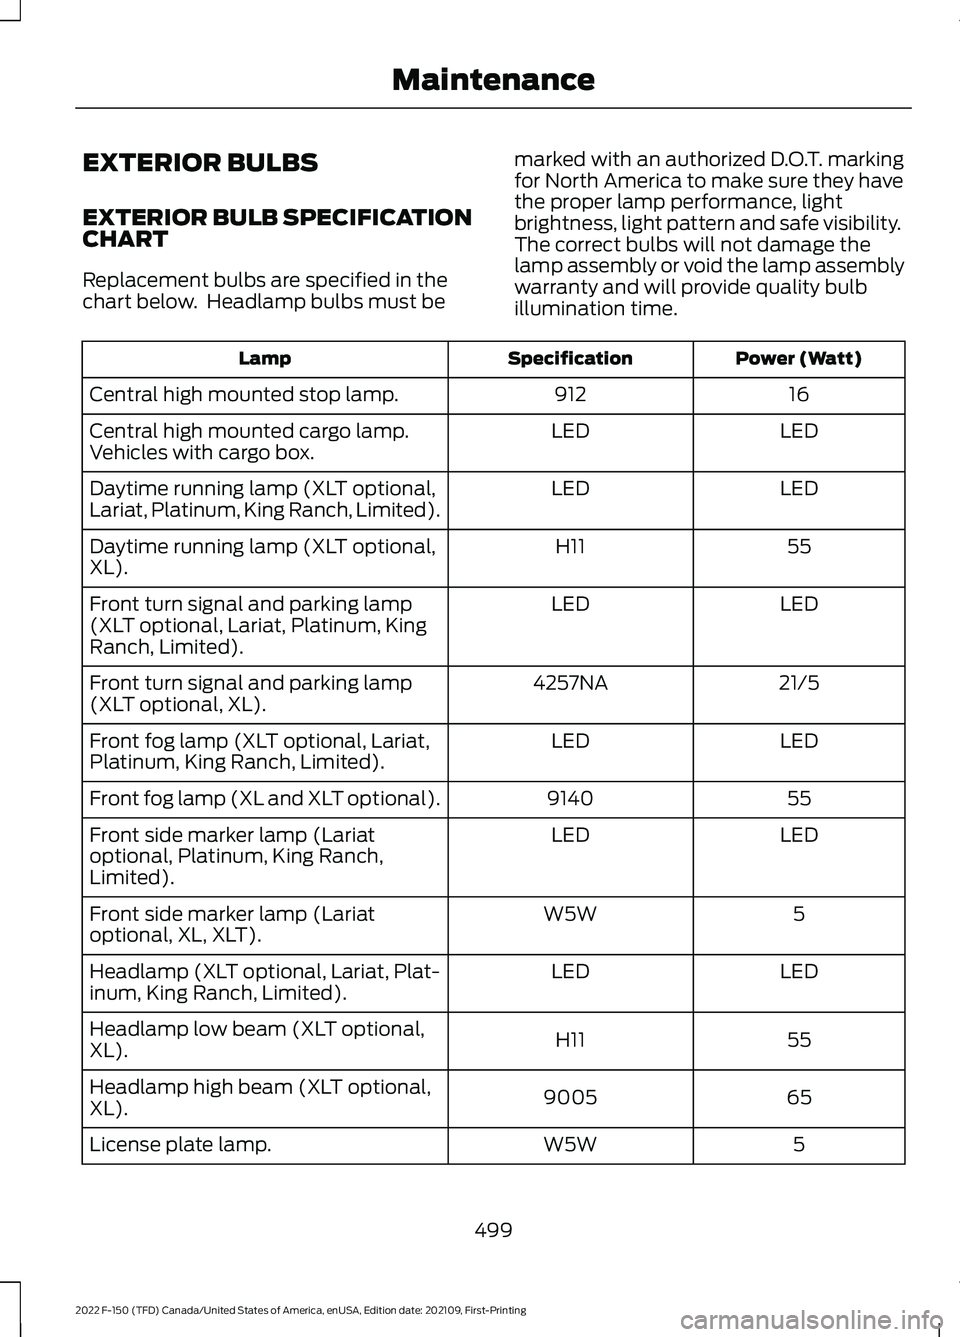 FORD F-150 2022  Owners Manual EXTERIOR BULBS
EXTERIOR BULB SPECIFICATION
CHART
Replacement bulbs are specified in the
chart below.  Headlamp bulbs must be
marked with an authorized D.O.T. marking
for North America to make sure the